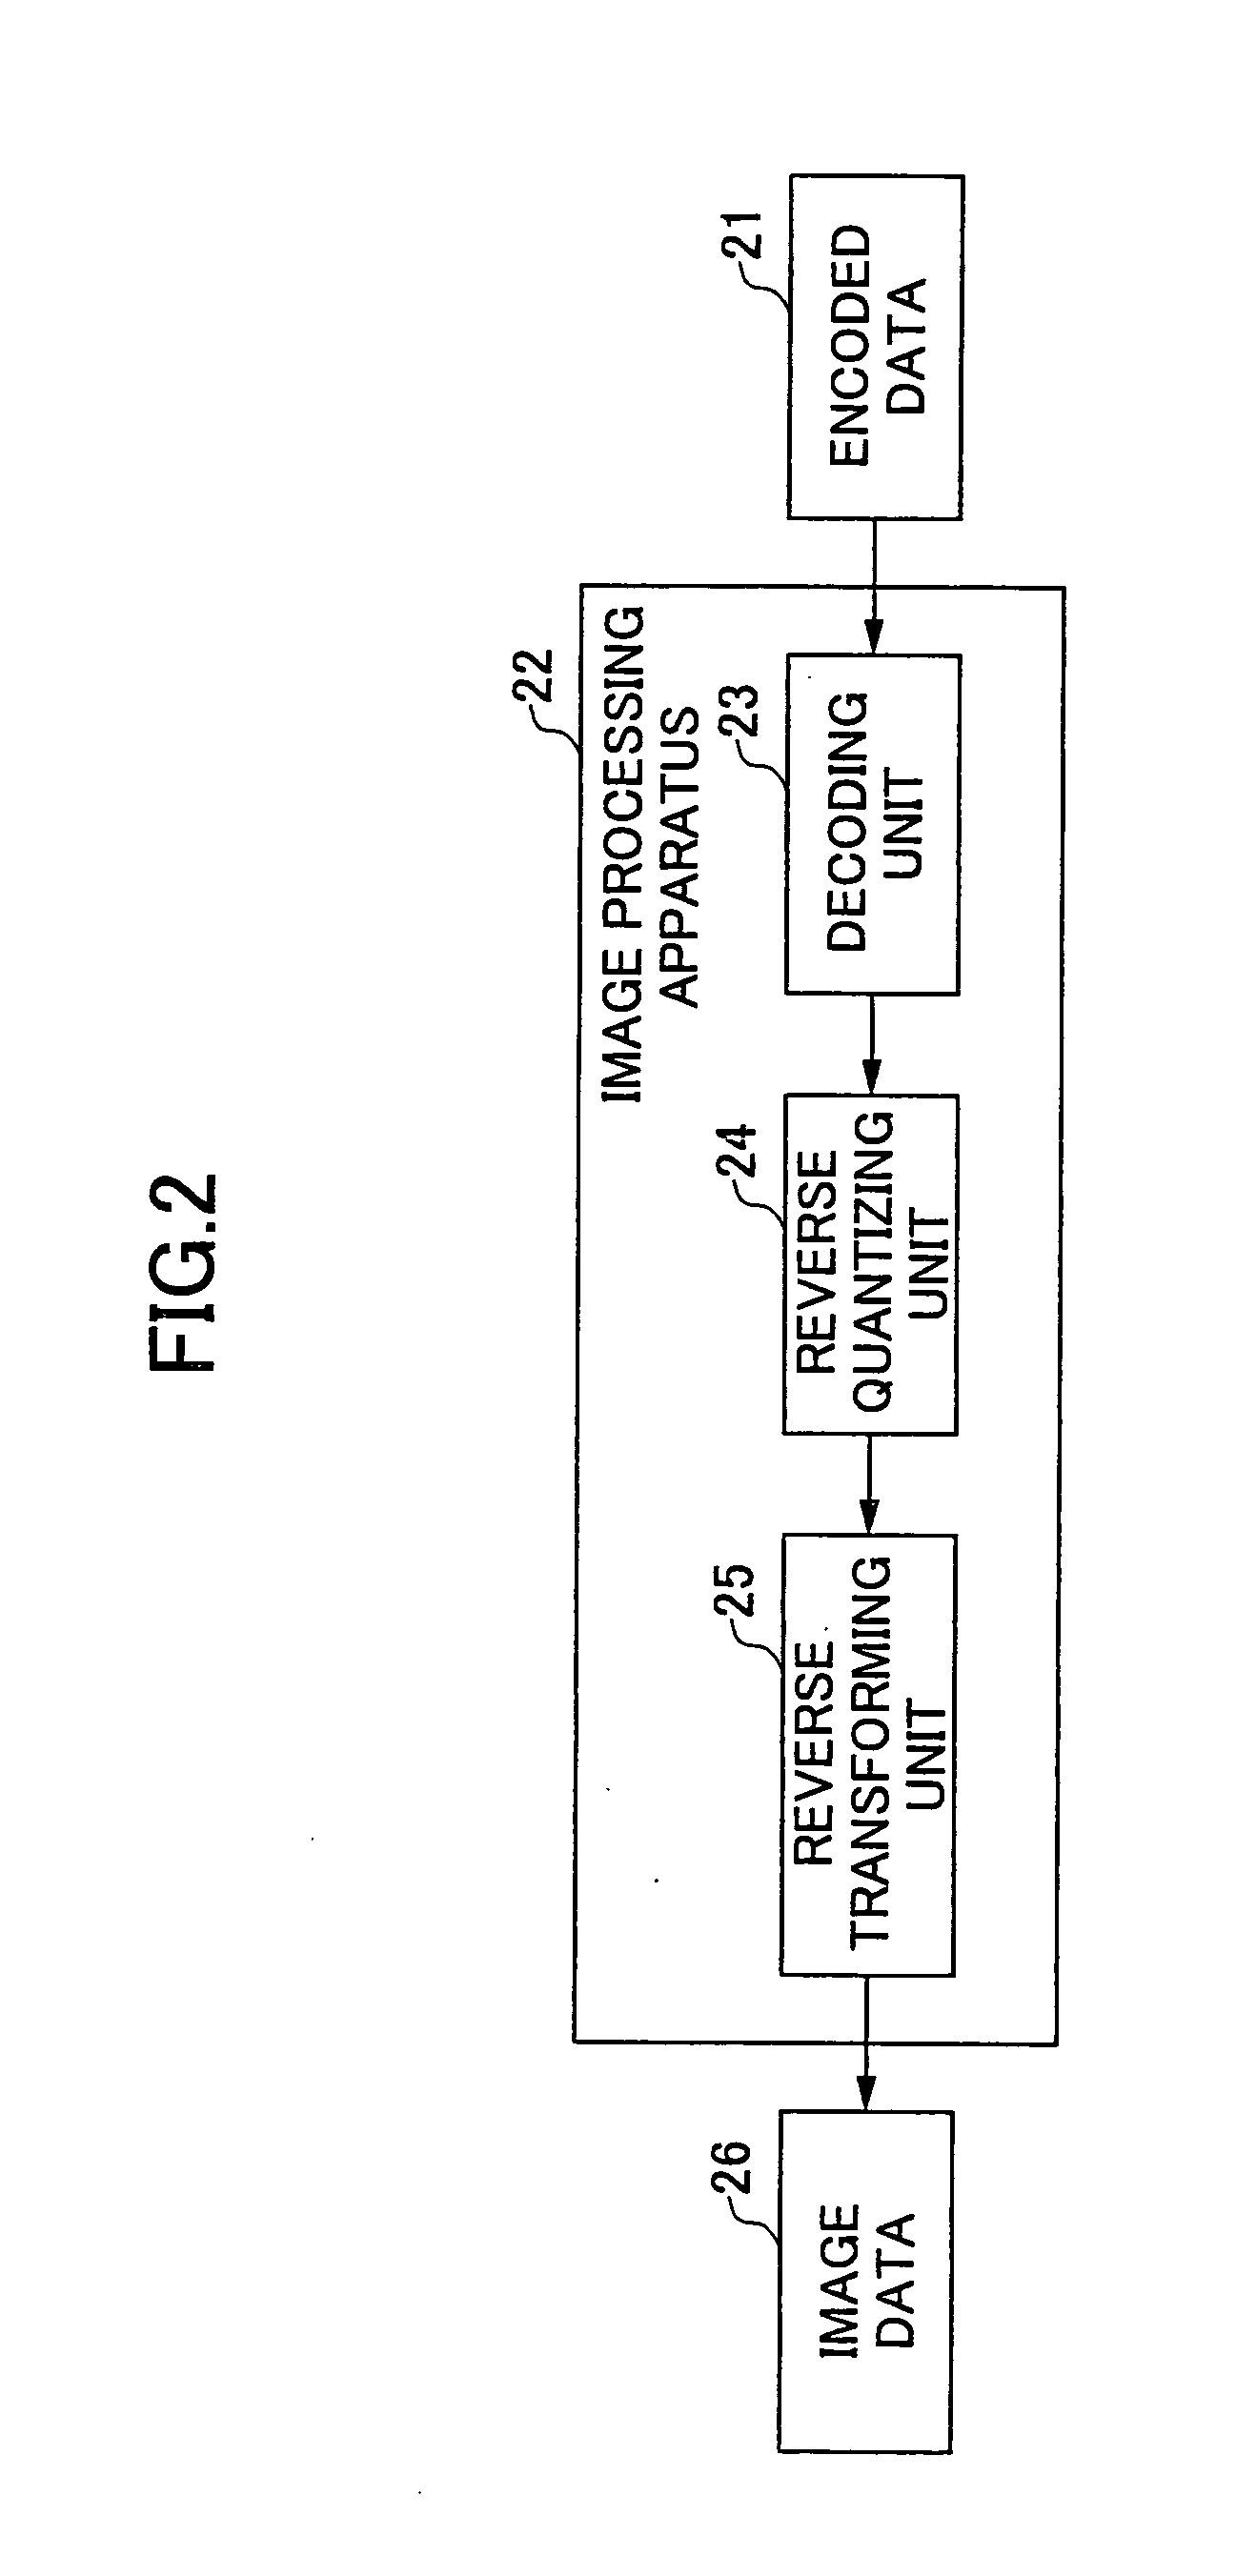 Method of processing image and audio information, image and audio processing apparatus and computer program that causes a computer to process image and audio information